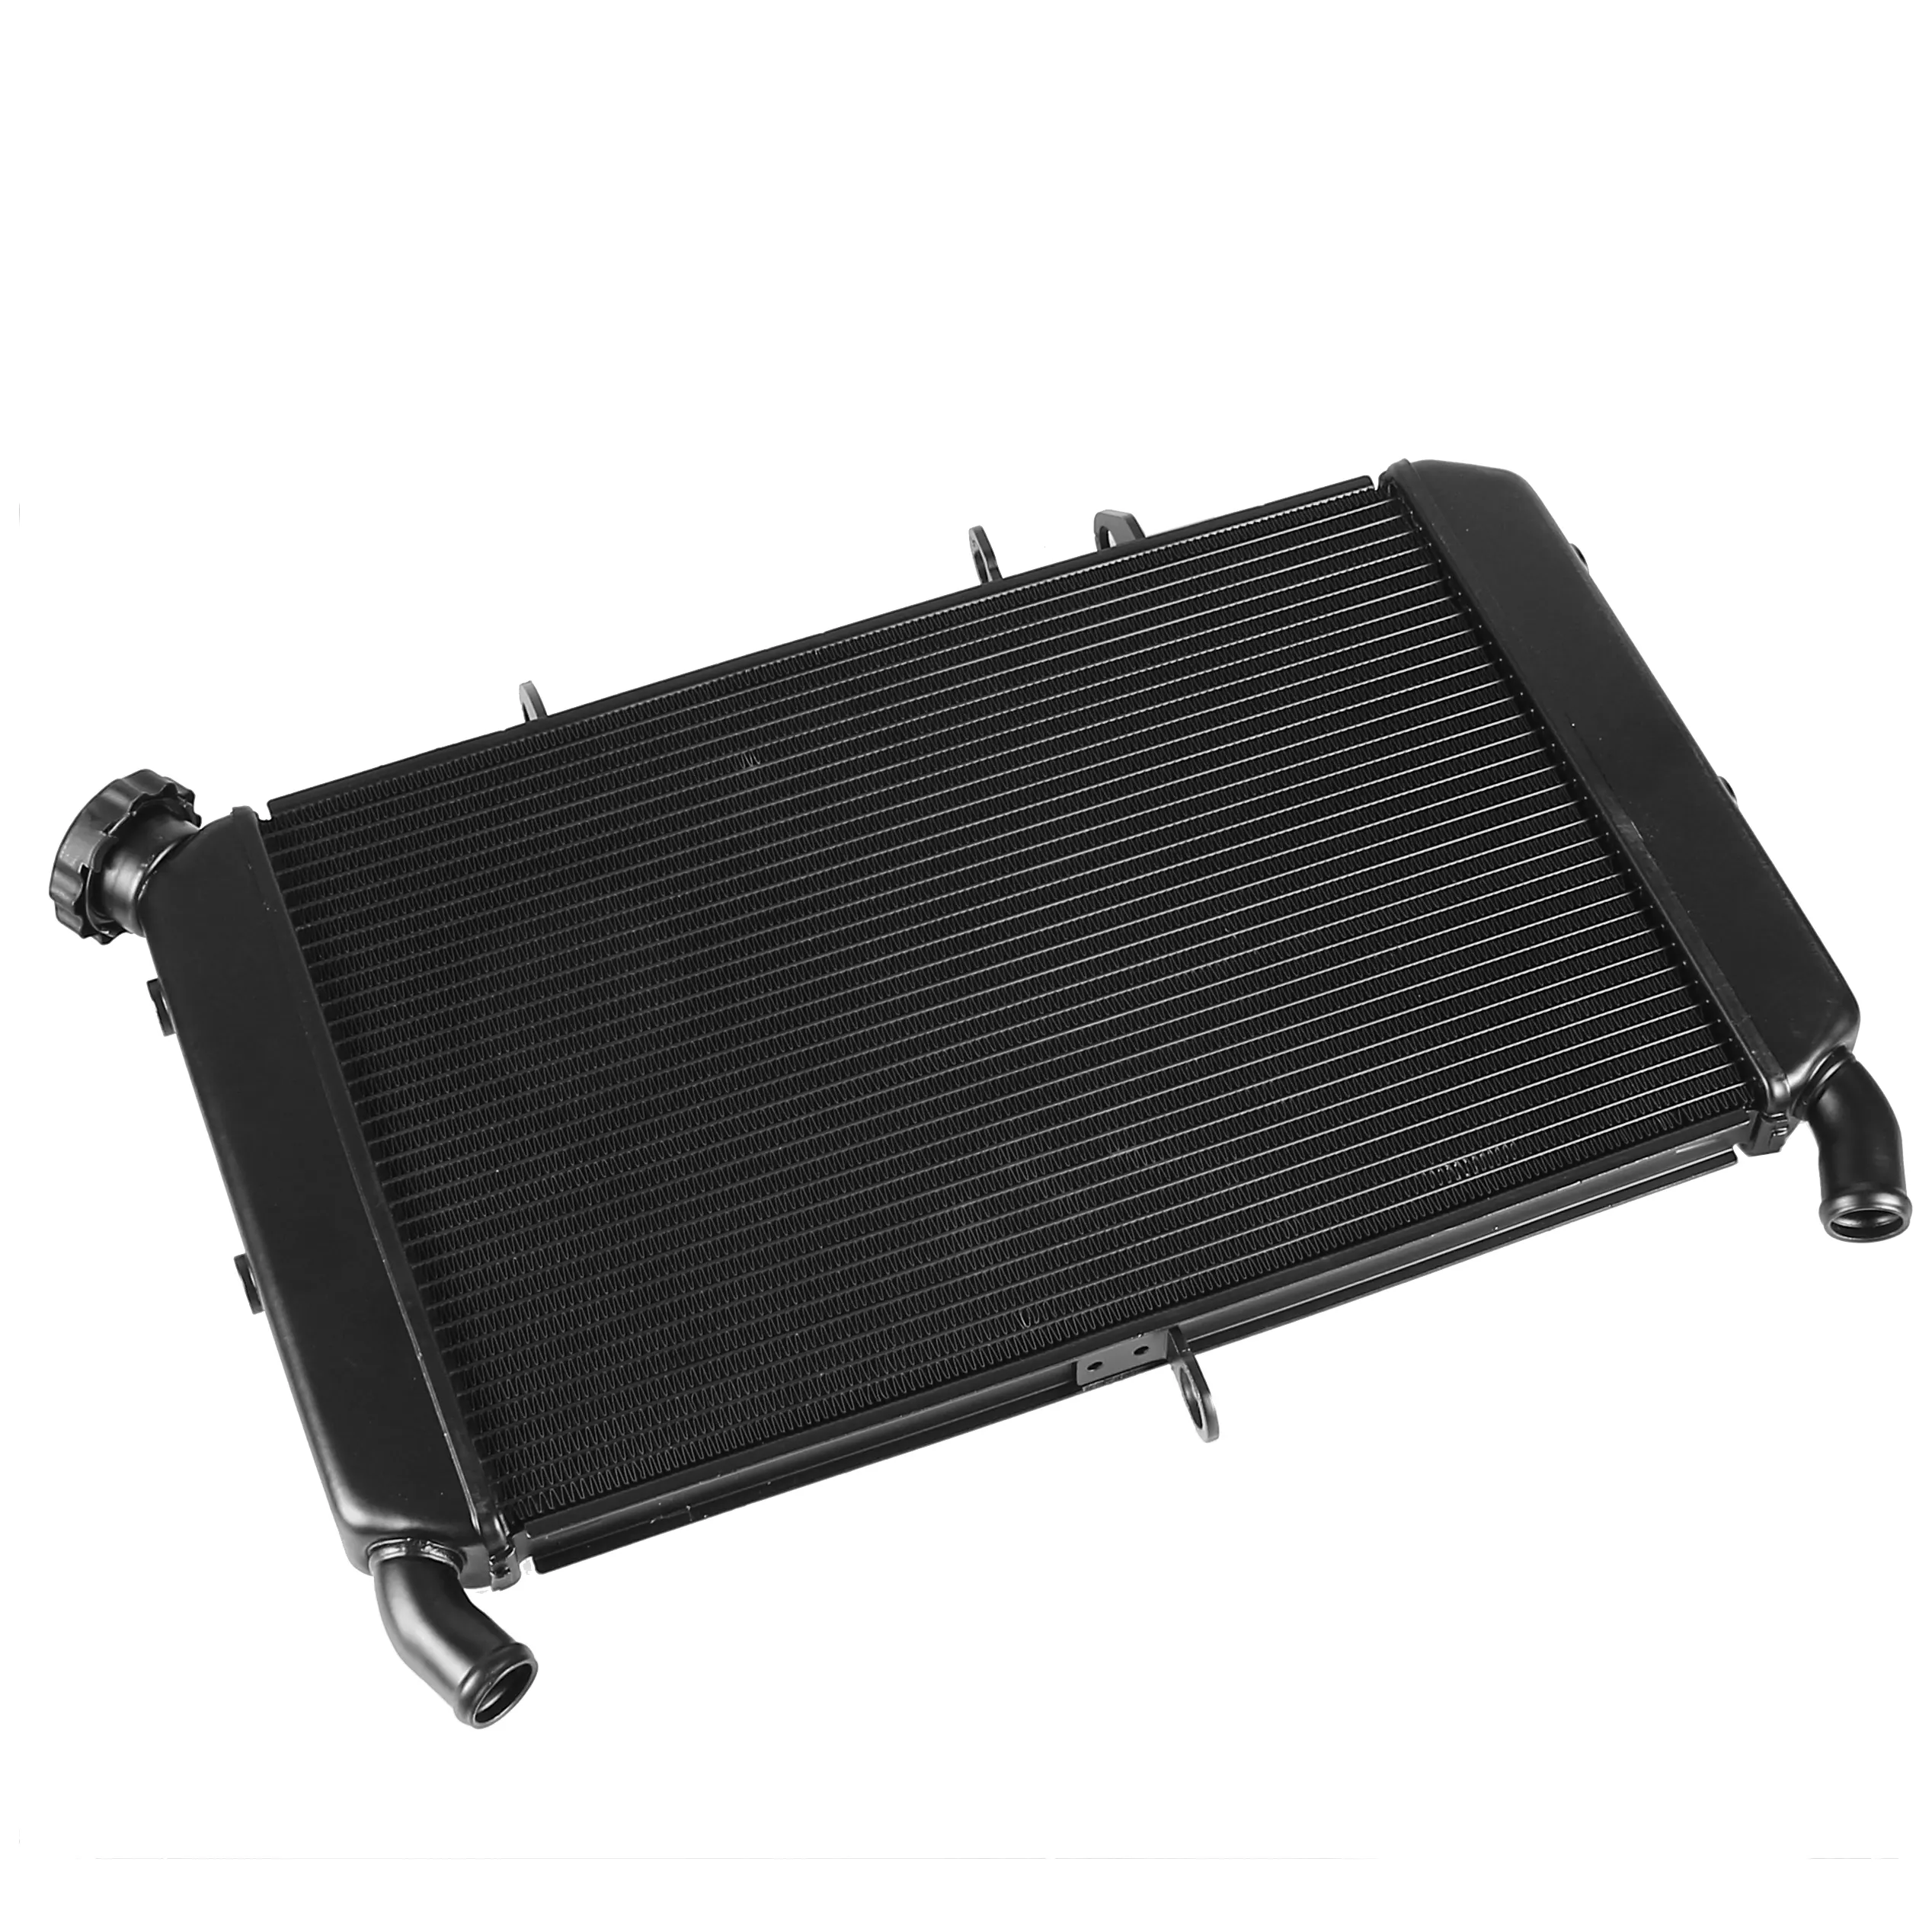 New Motorcycle Cooling Radiator Aluminum Racing Cooler 2018 2019 for Yamaha MT09 Mt 09 2017 Black Box Package Carton Packing